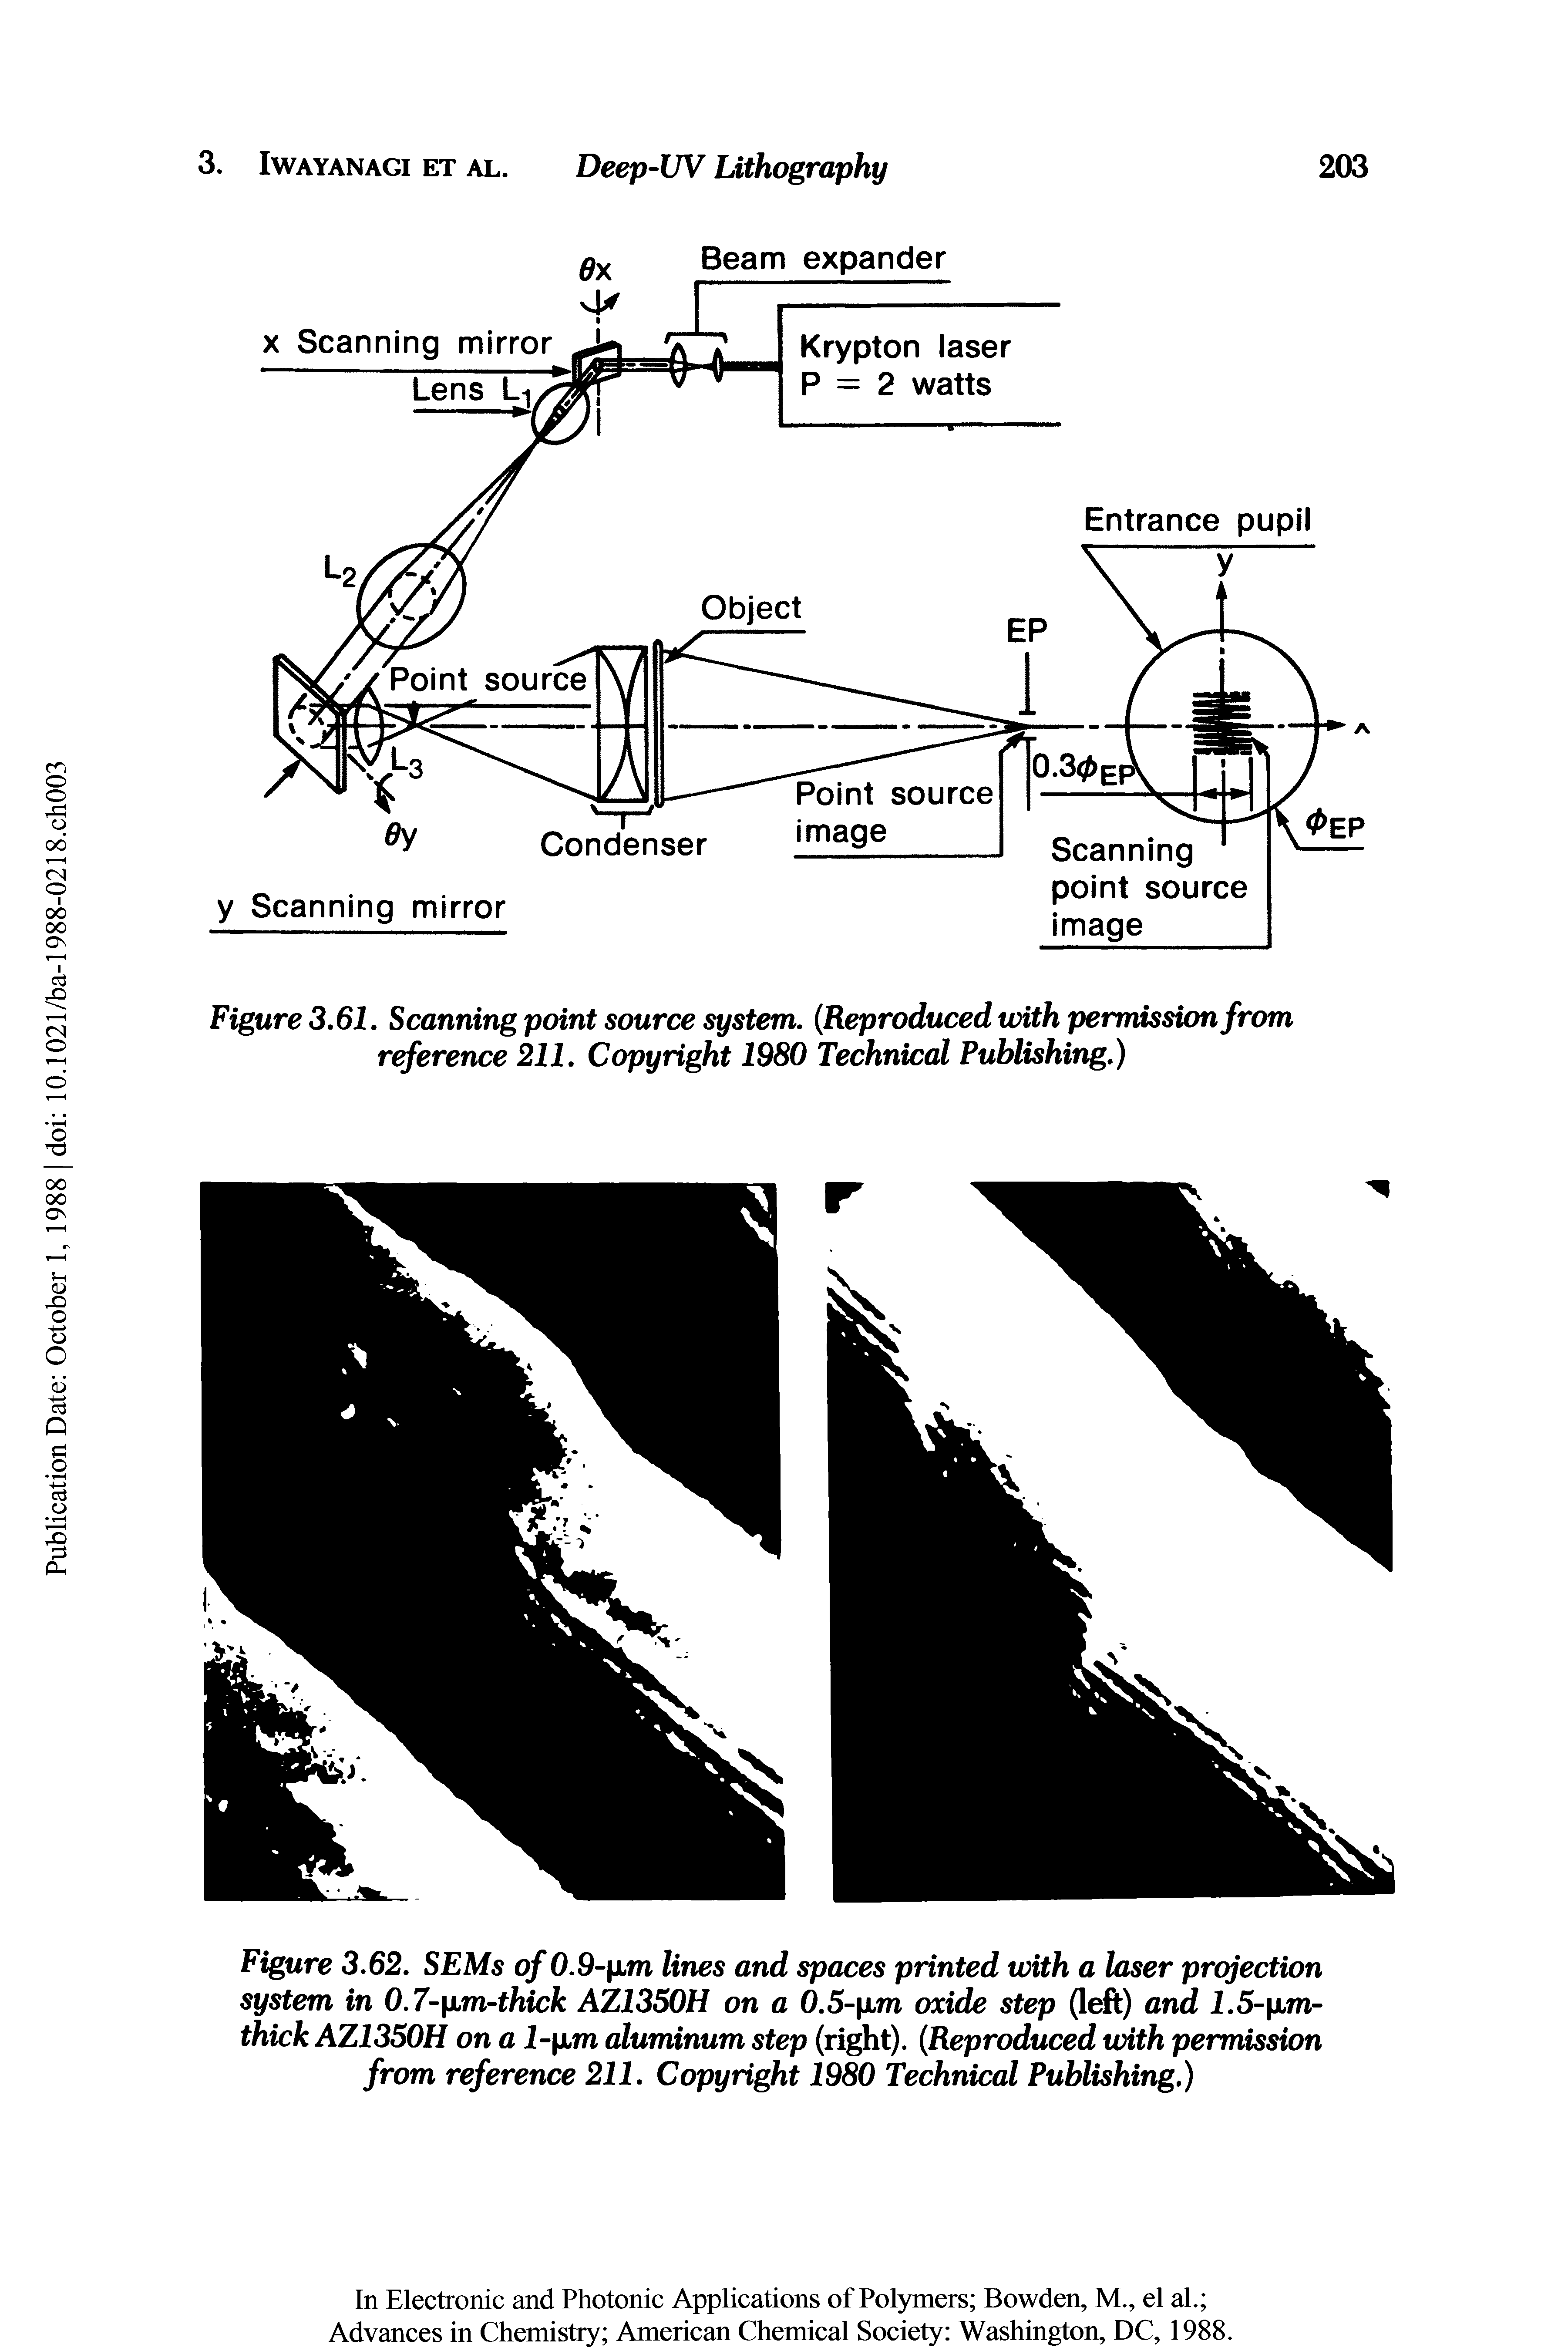 Figure 3.61. Scanning point source system. Reproduced with permission from reference 211. Copyright 1980 Technical Publishing.)...